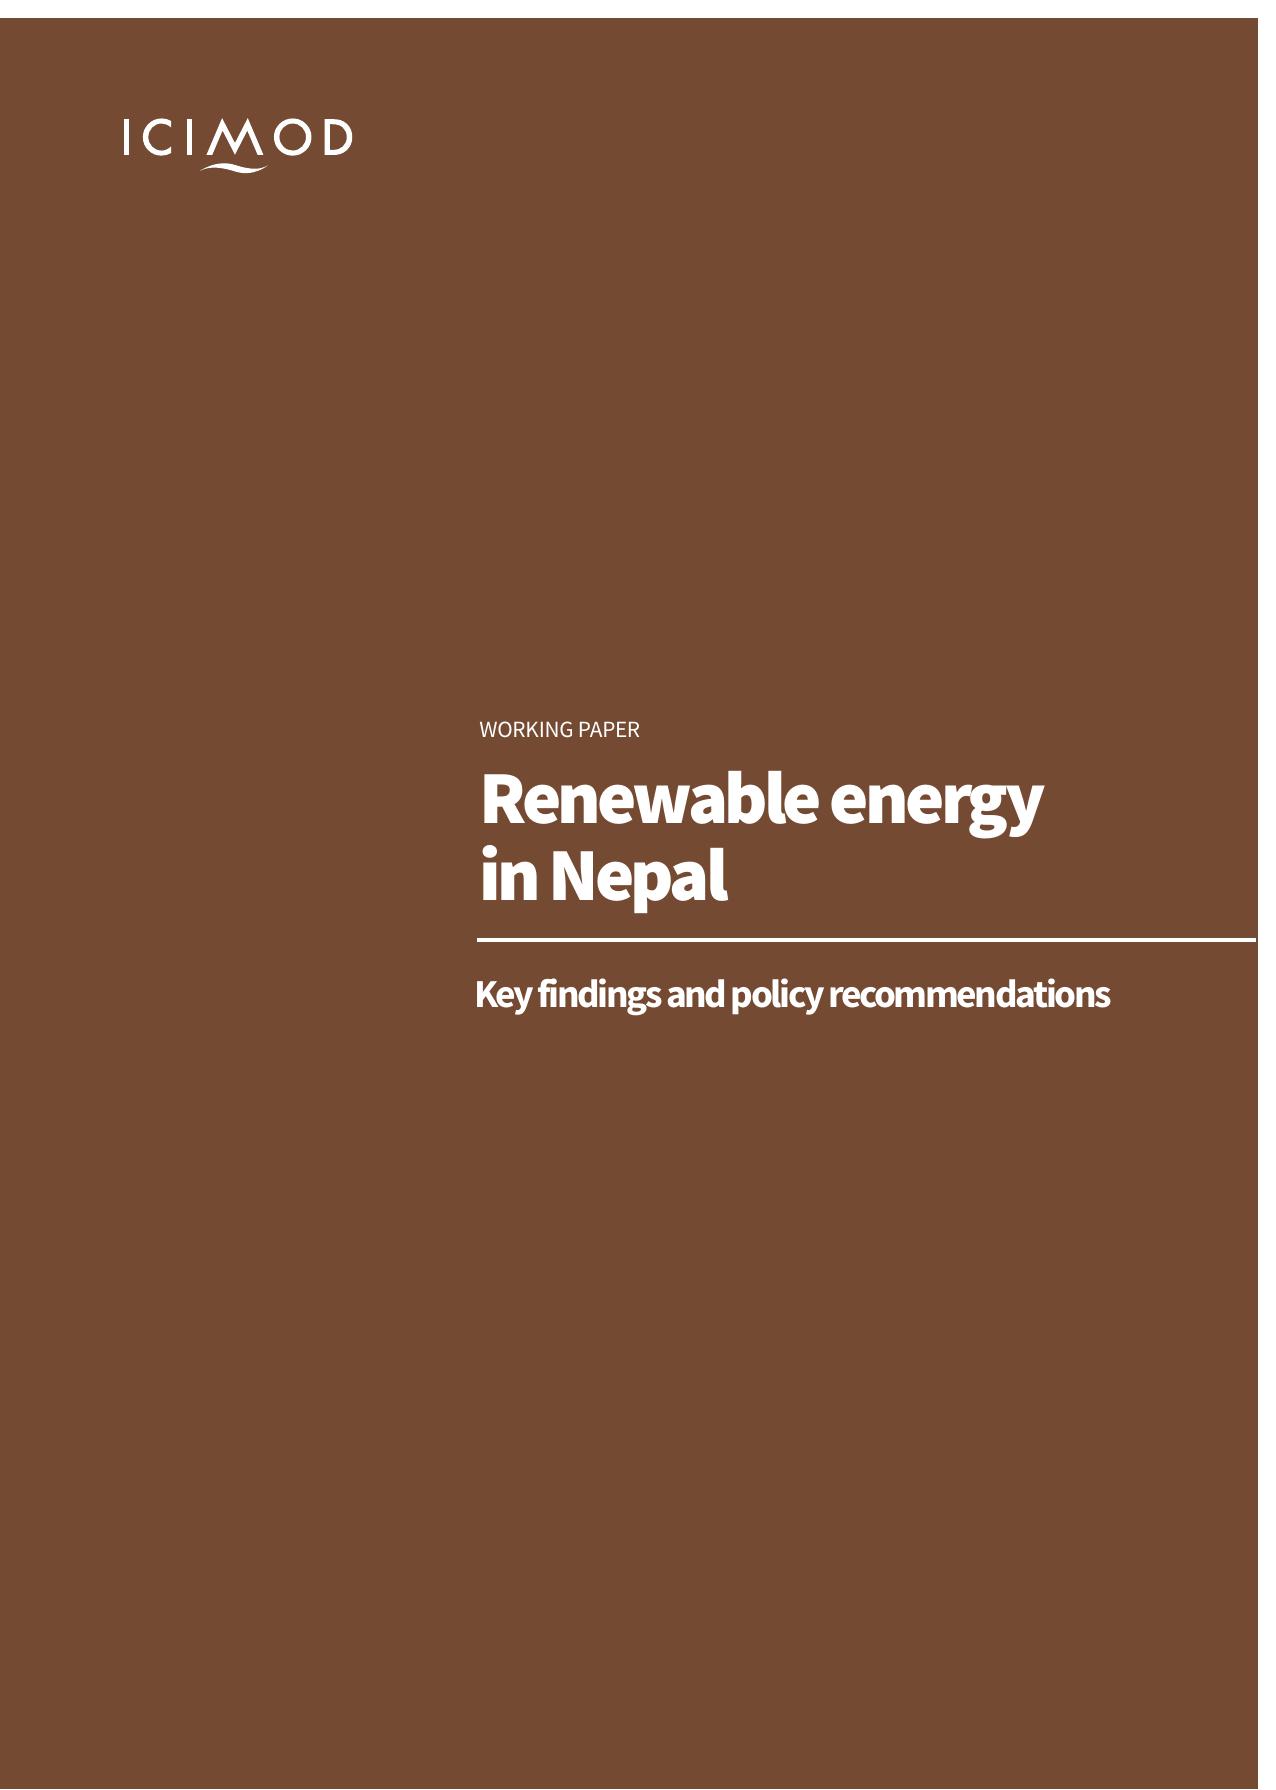 Renewable energy in Nepal: Key findings and policy recommendations